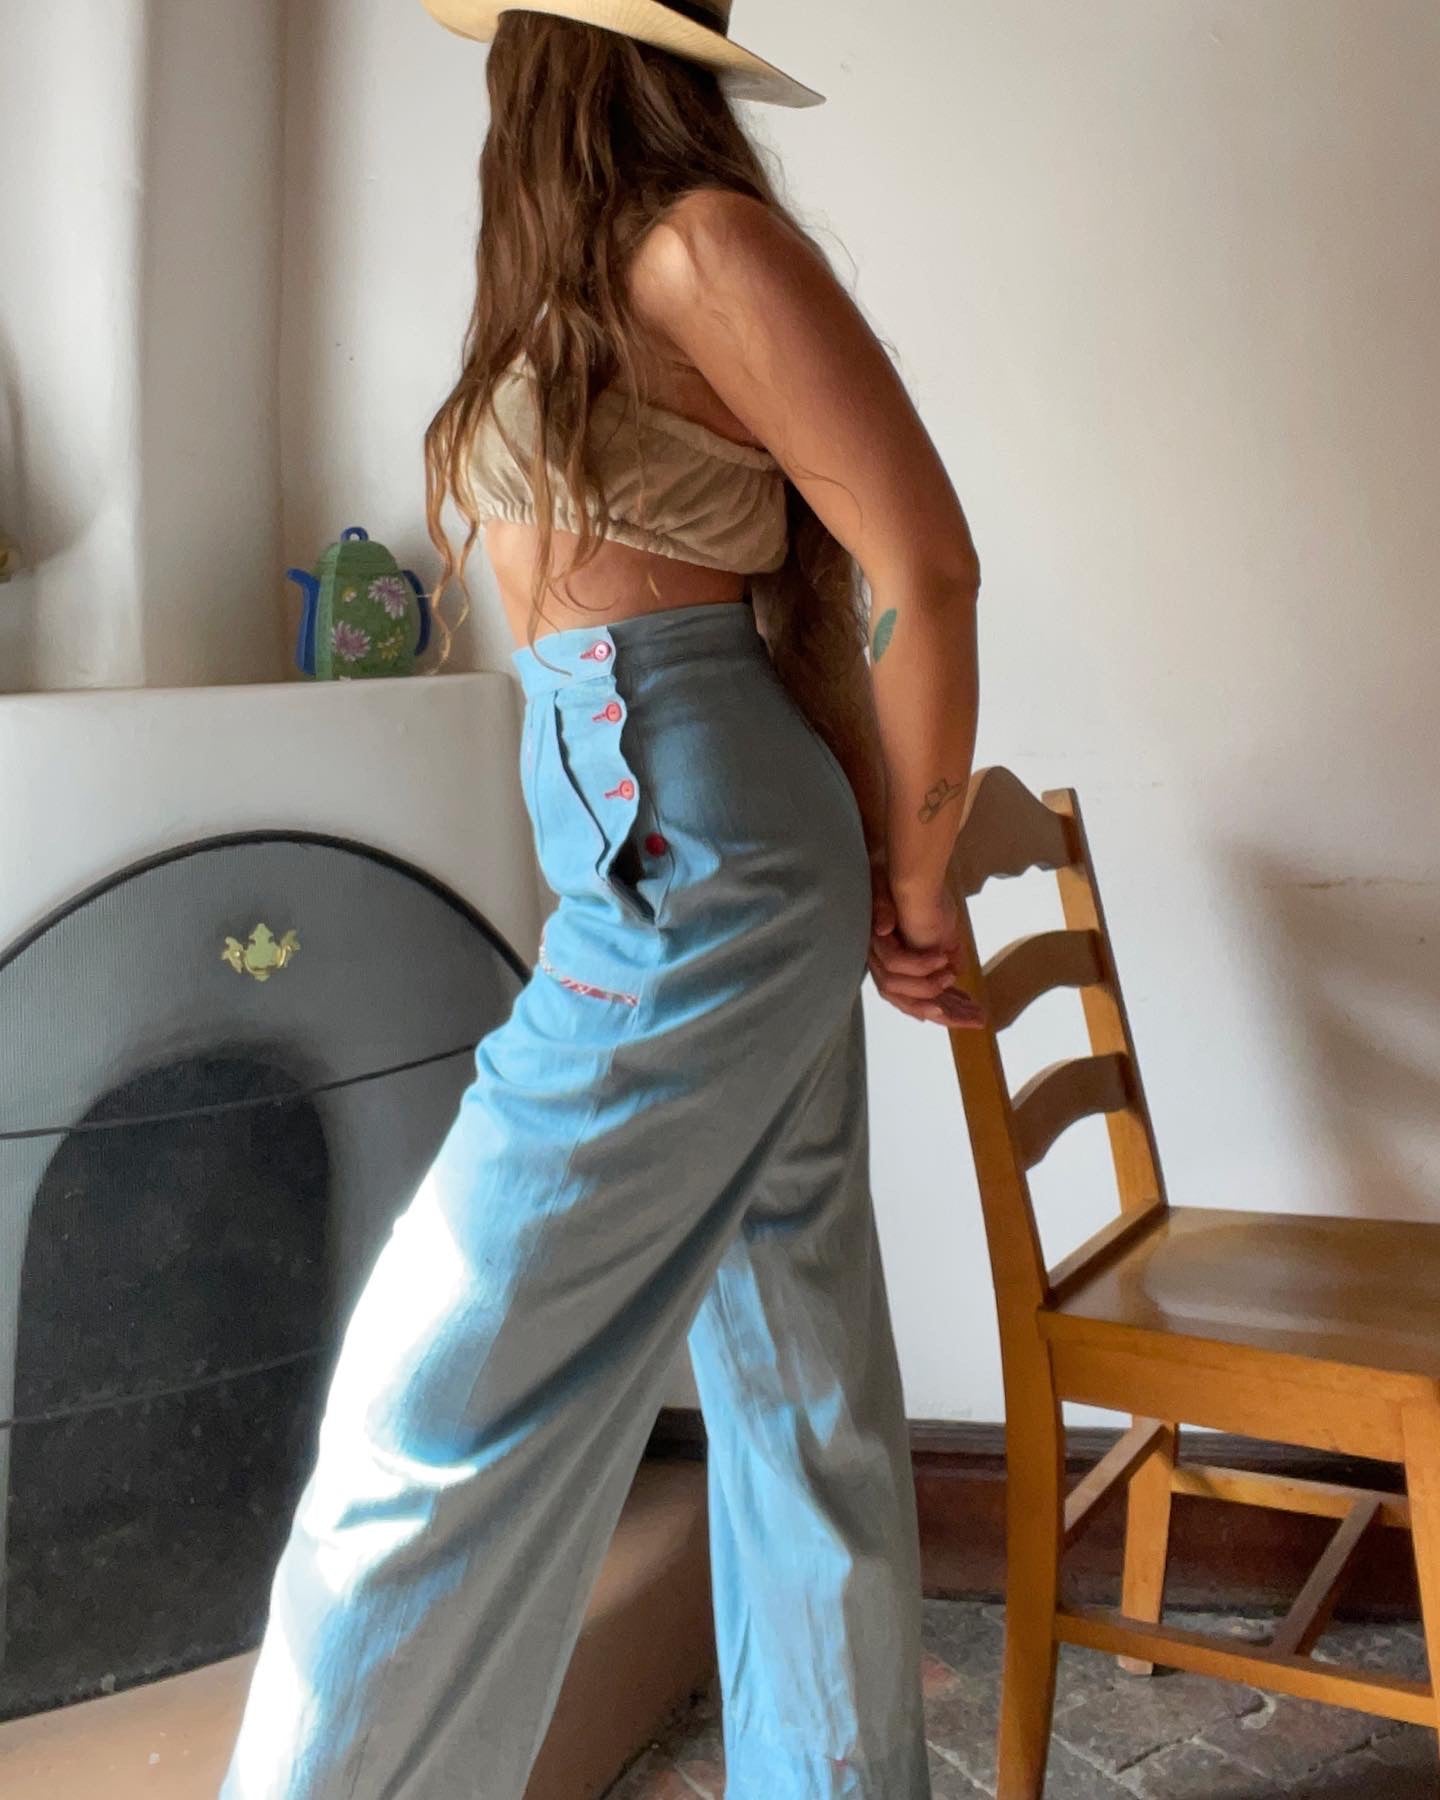 1940s Side Button Chambray Pants